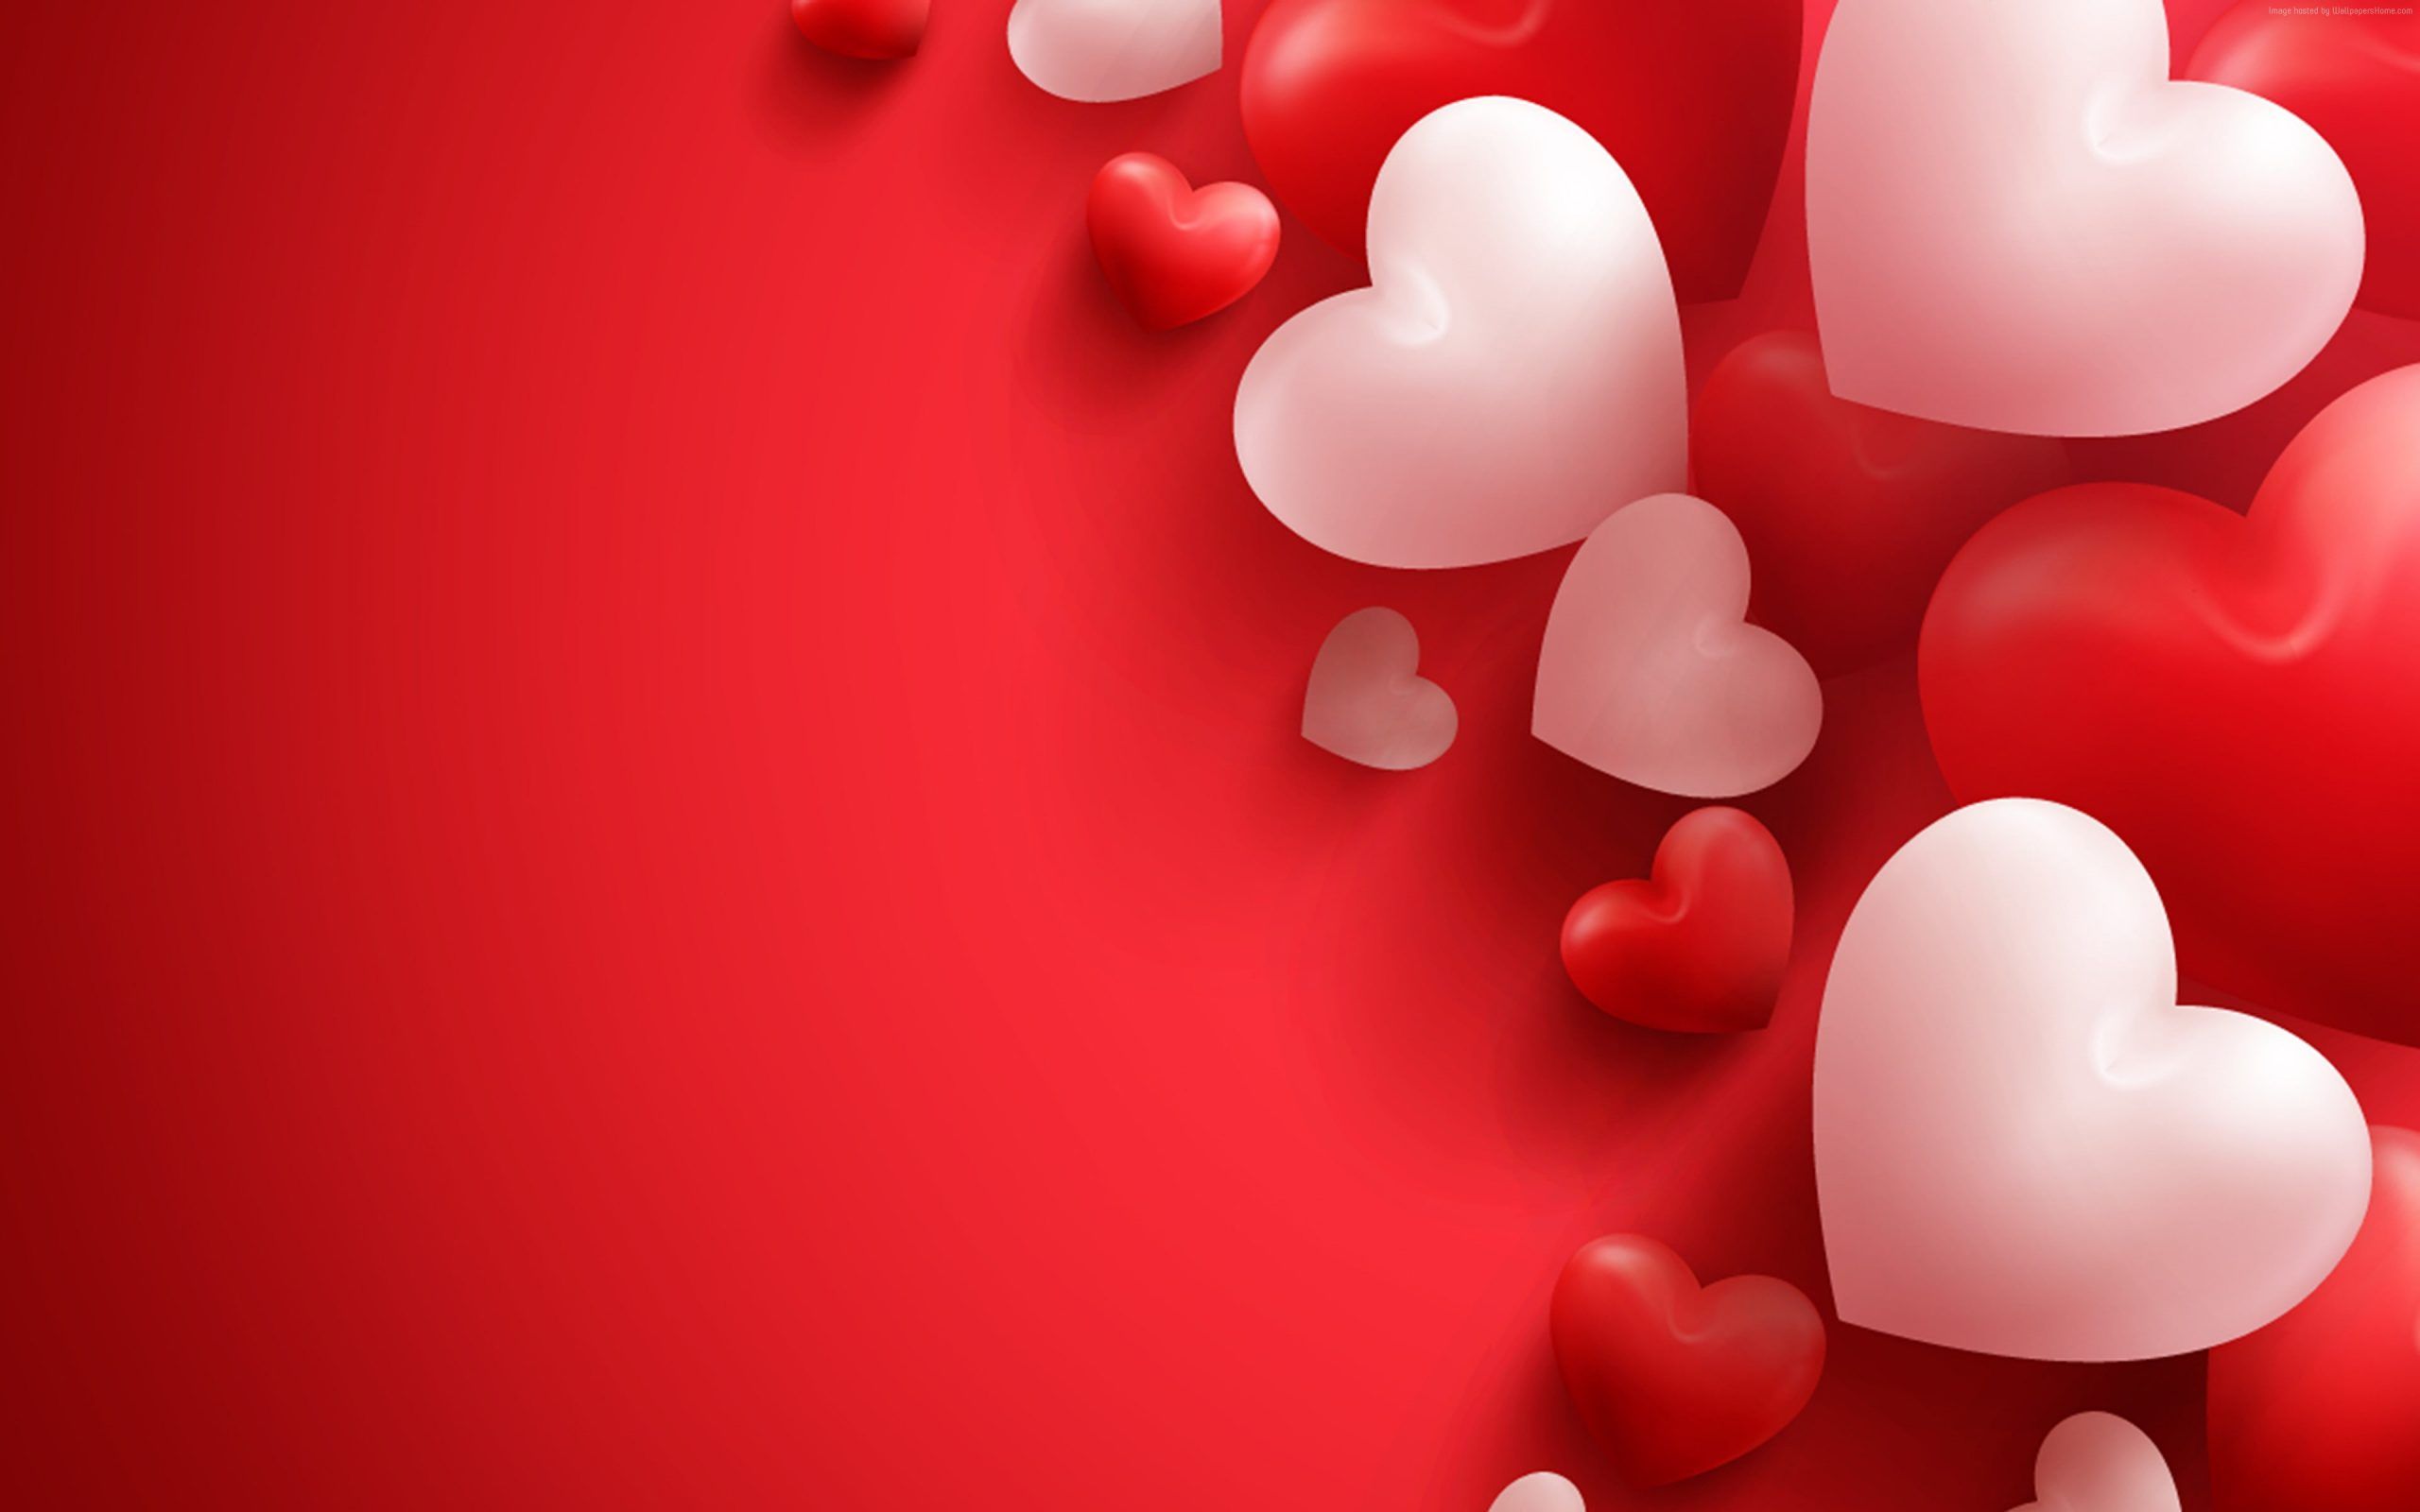 4k, heart, Valentines Day, love image, no people, red, balloon wallpaper • Wallpaper For You HD Wallpaper For Desktop & Mobile